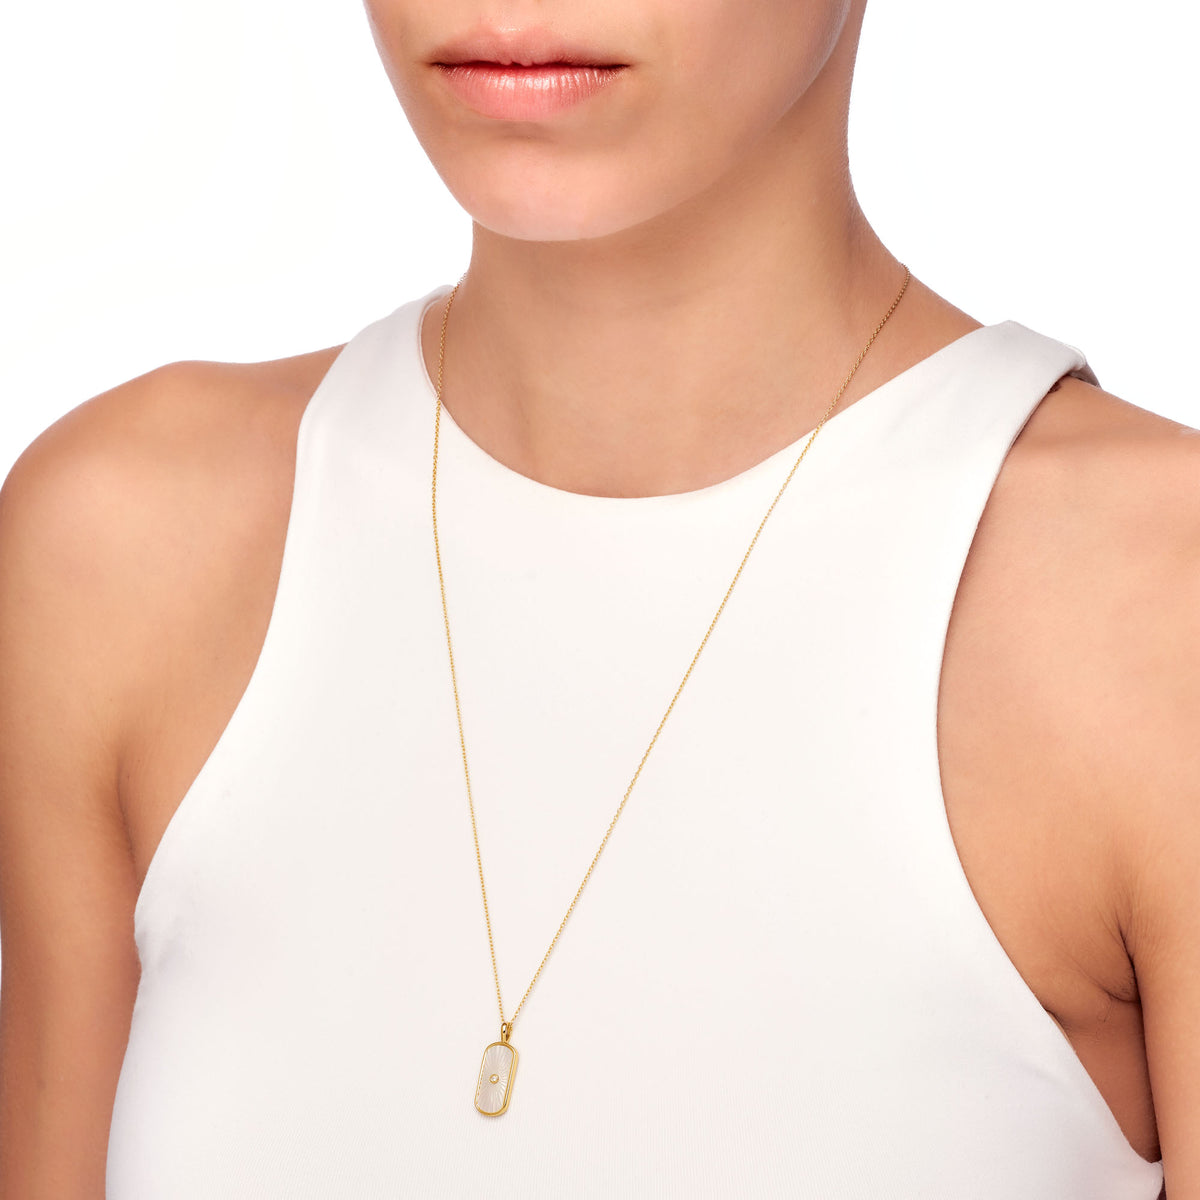 Mellonia | Lebbeck Necklace | Mother of Pearl &amp; White CZ | Gold Plated 925 Silver